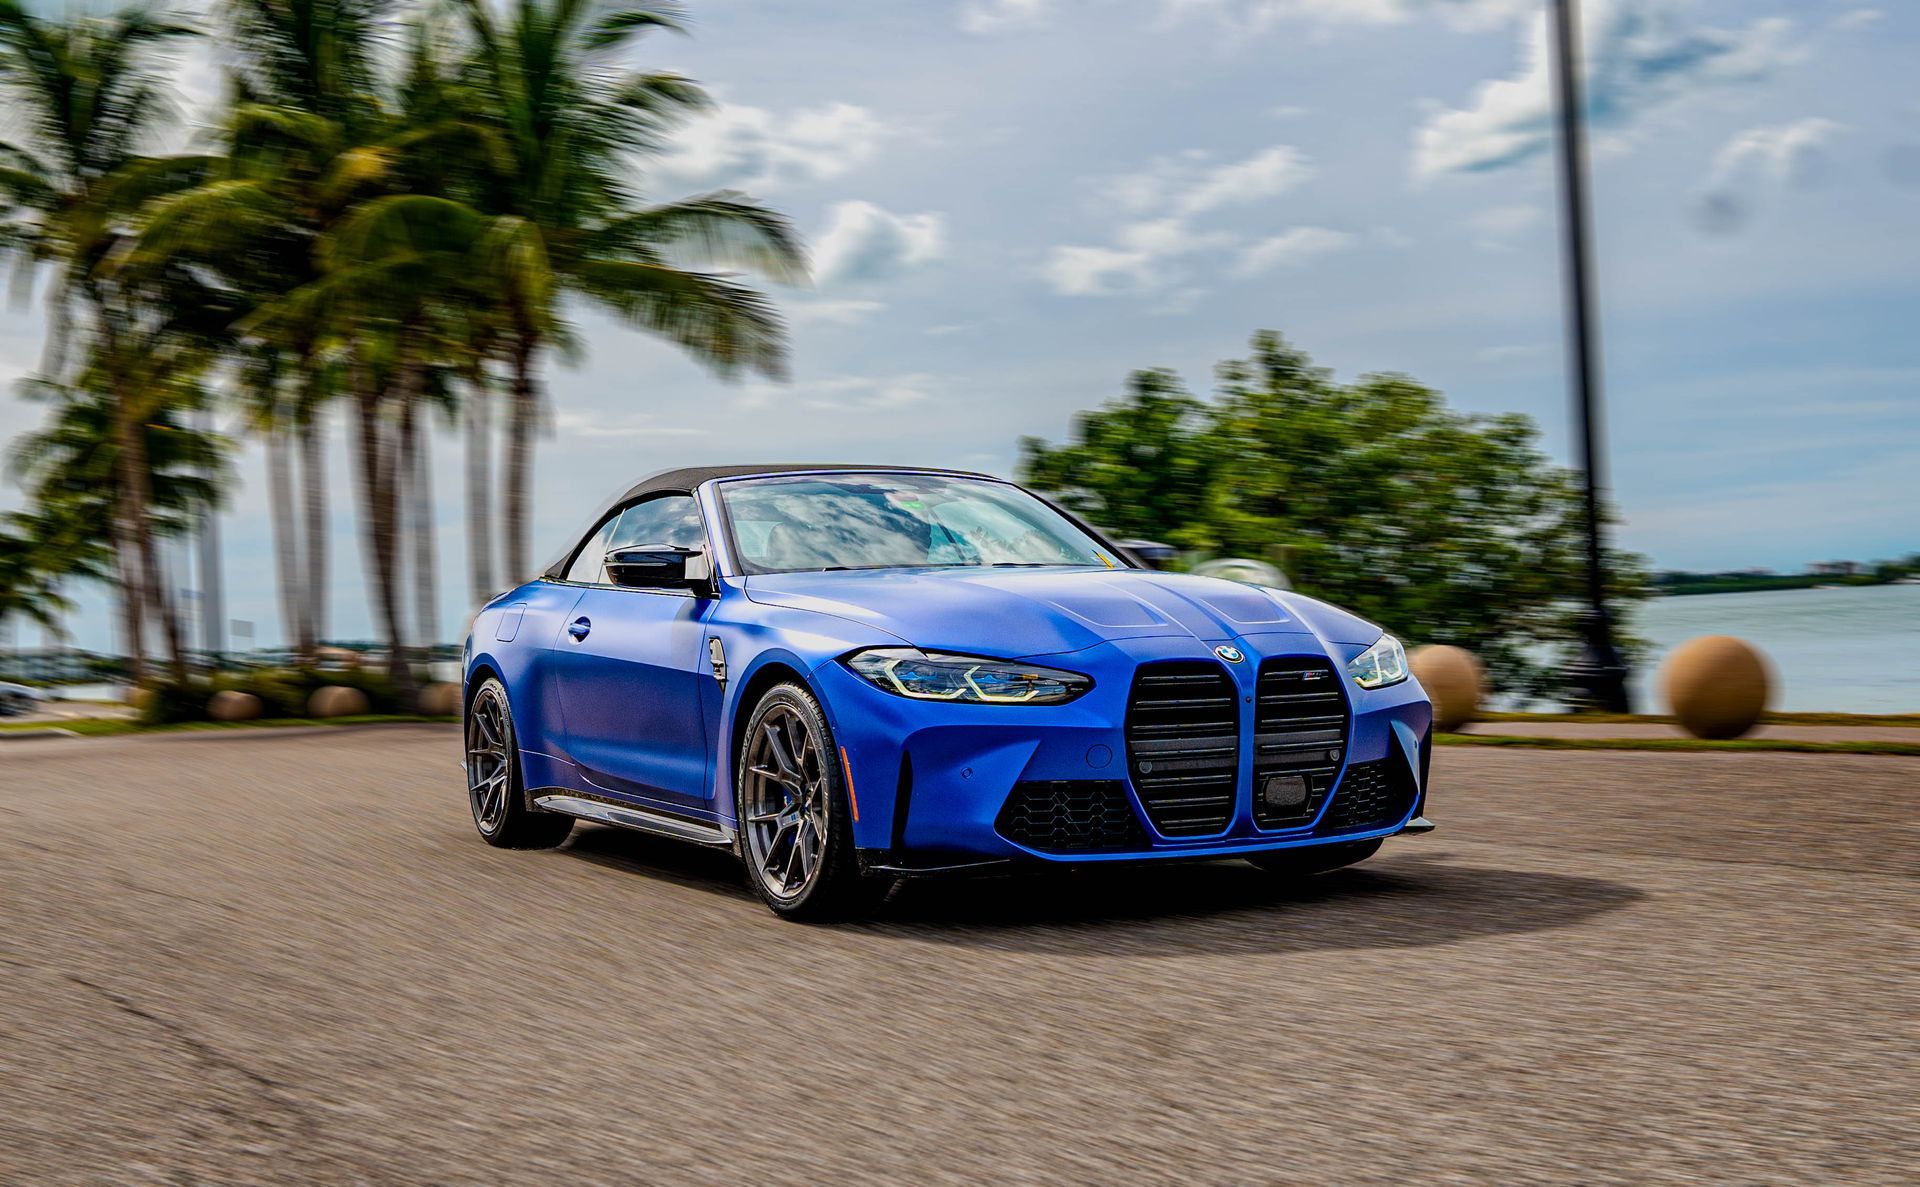 A blue bmw m4 convertible is parked on the side of the road next to palm trees.